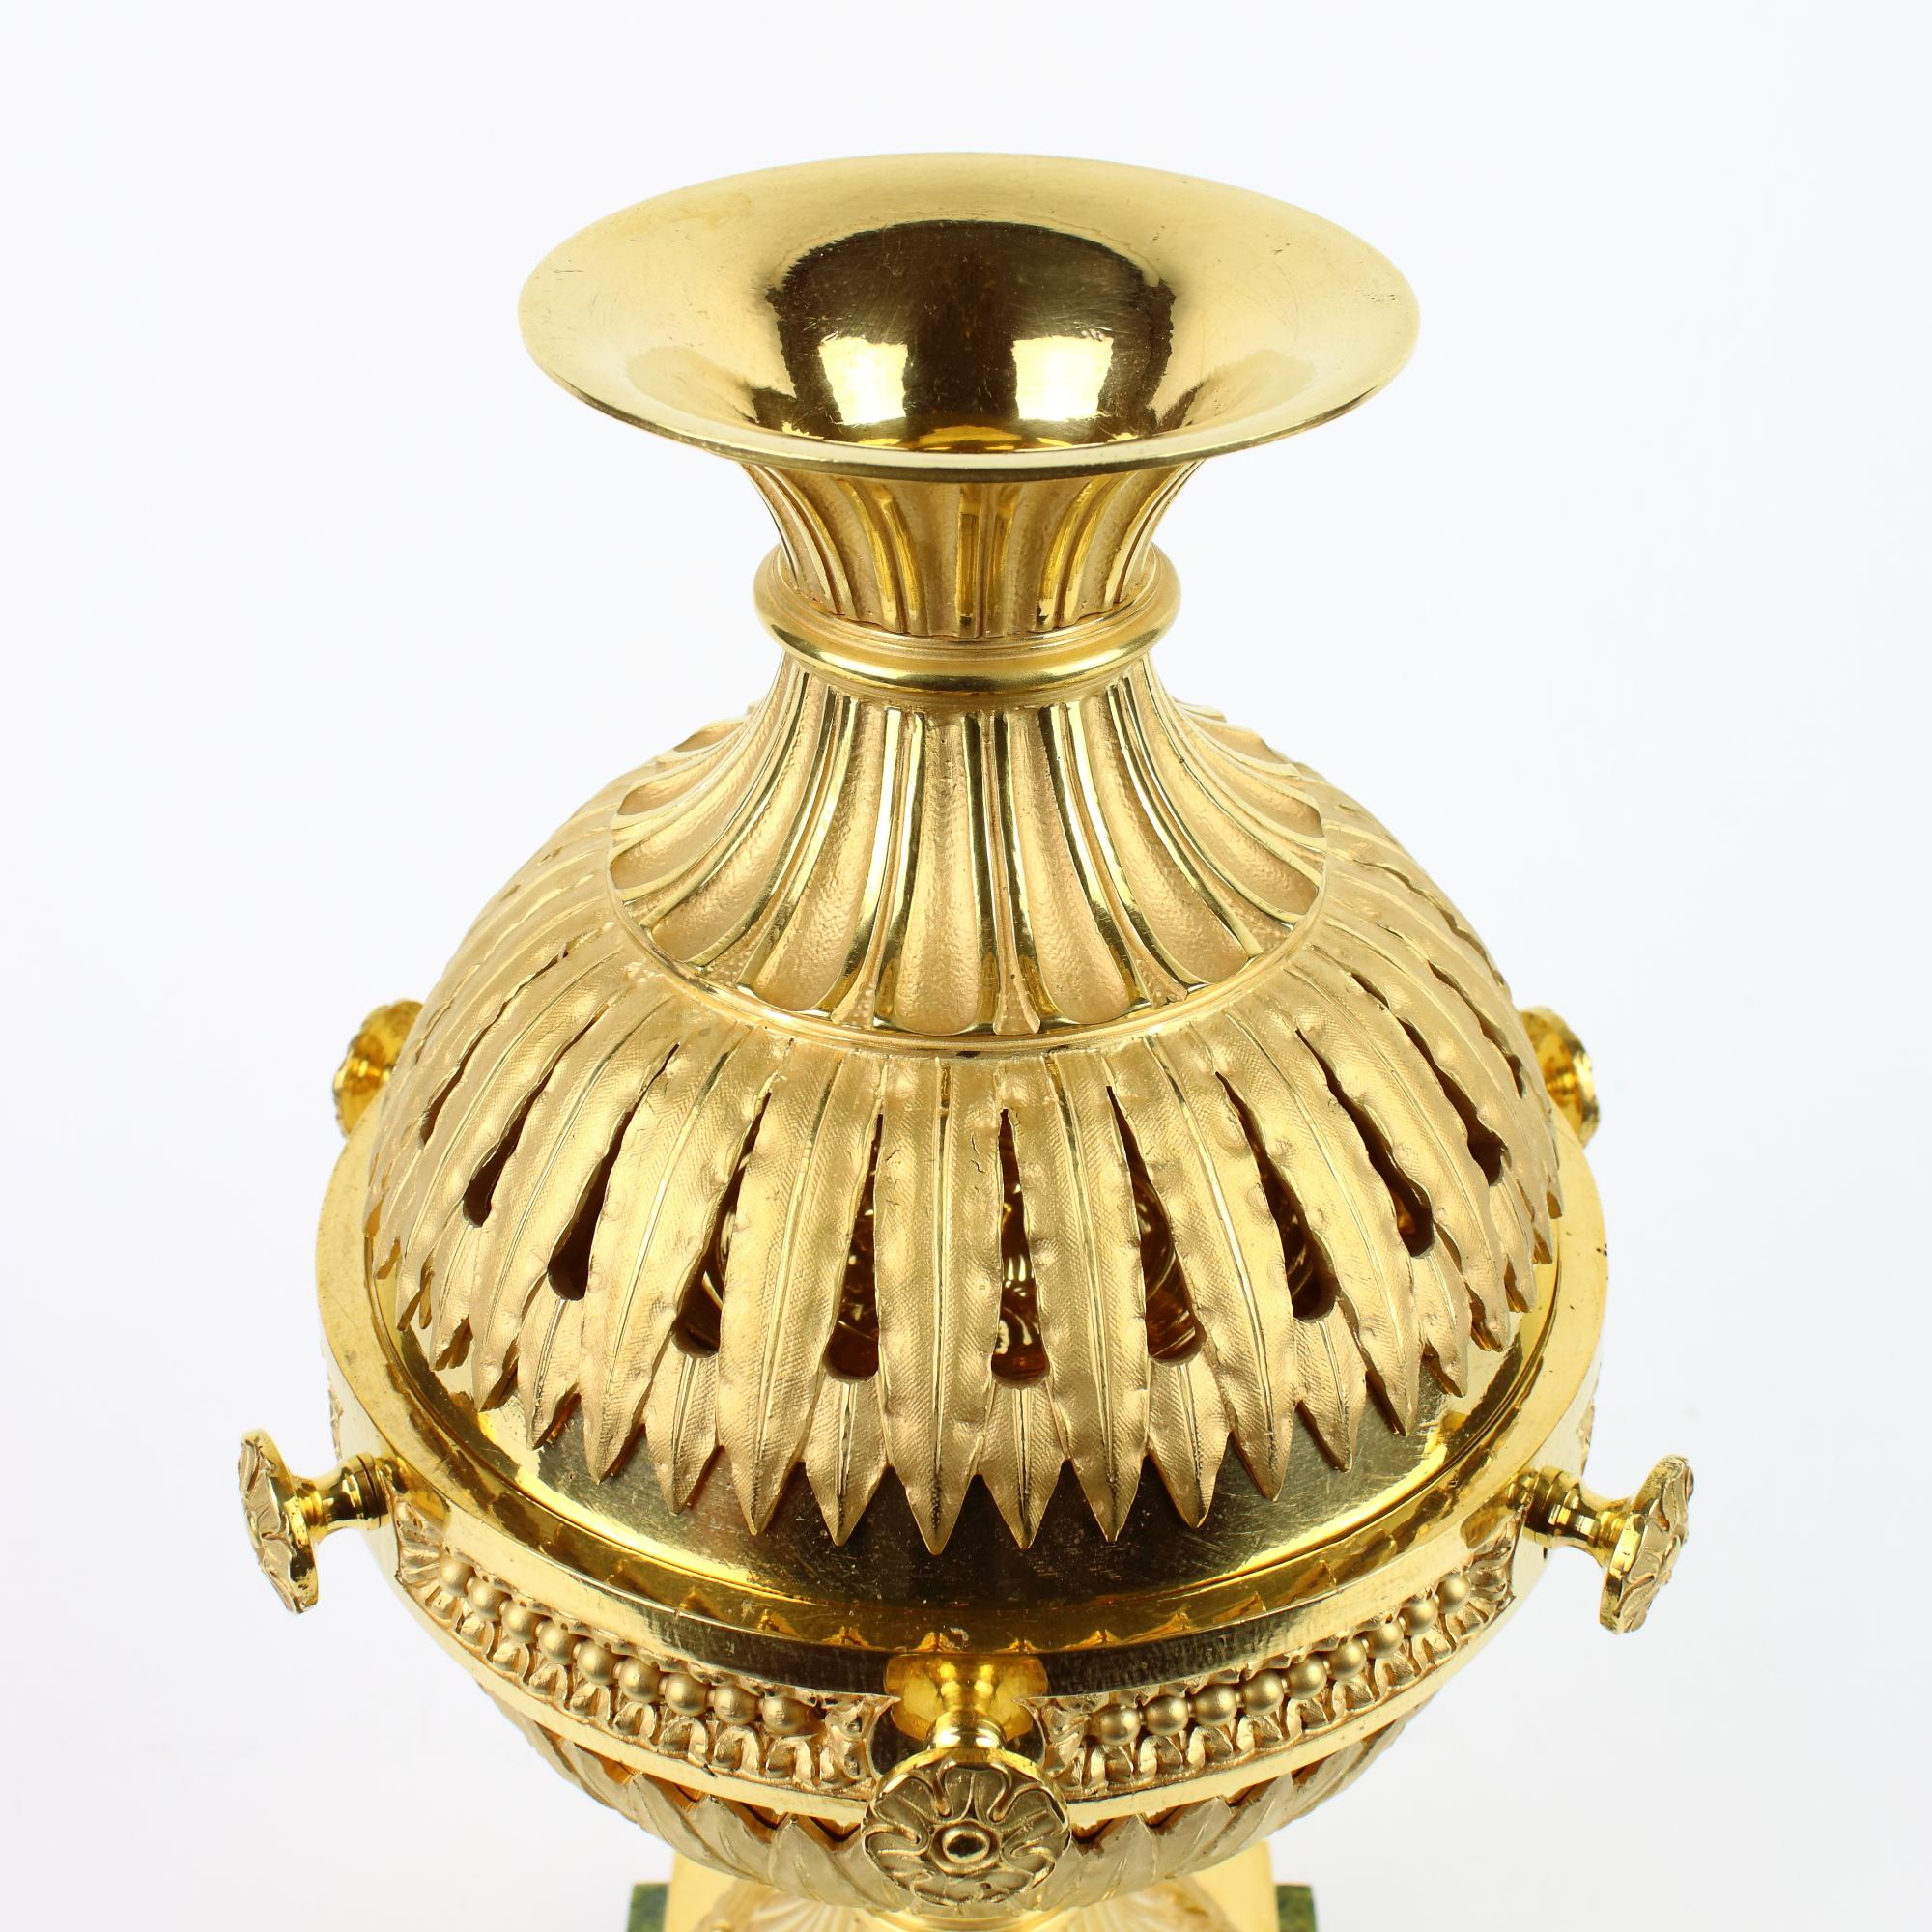 French Late 18thh Century Louis XVI Gilt Bronze Incense Burner or Brule Parfum For Sale 1